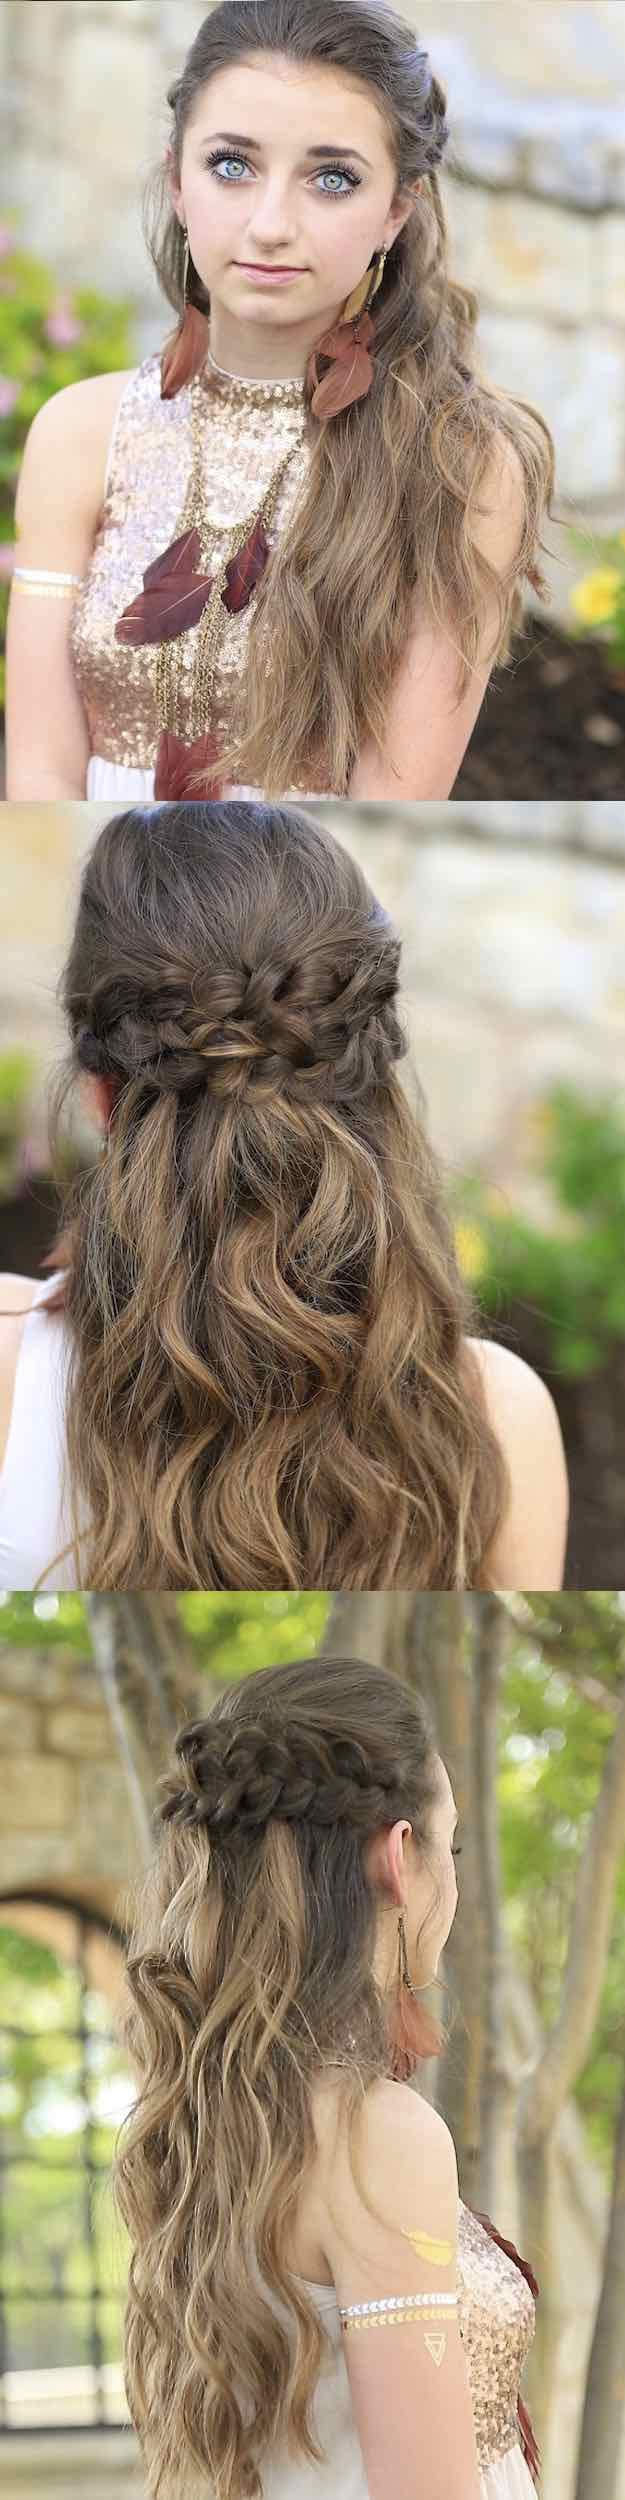 Prom Half Up Hairstyles
 25 Easy Half Up Half Down Hairstyle Tutorials For Prom